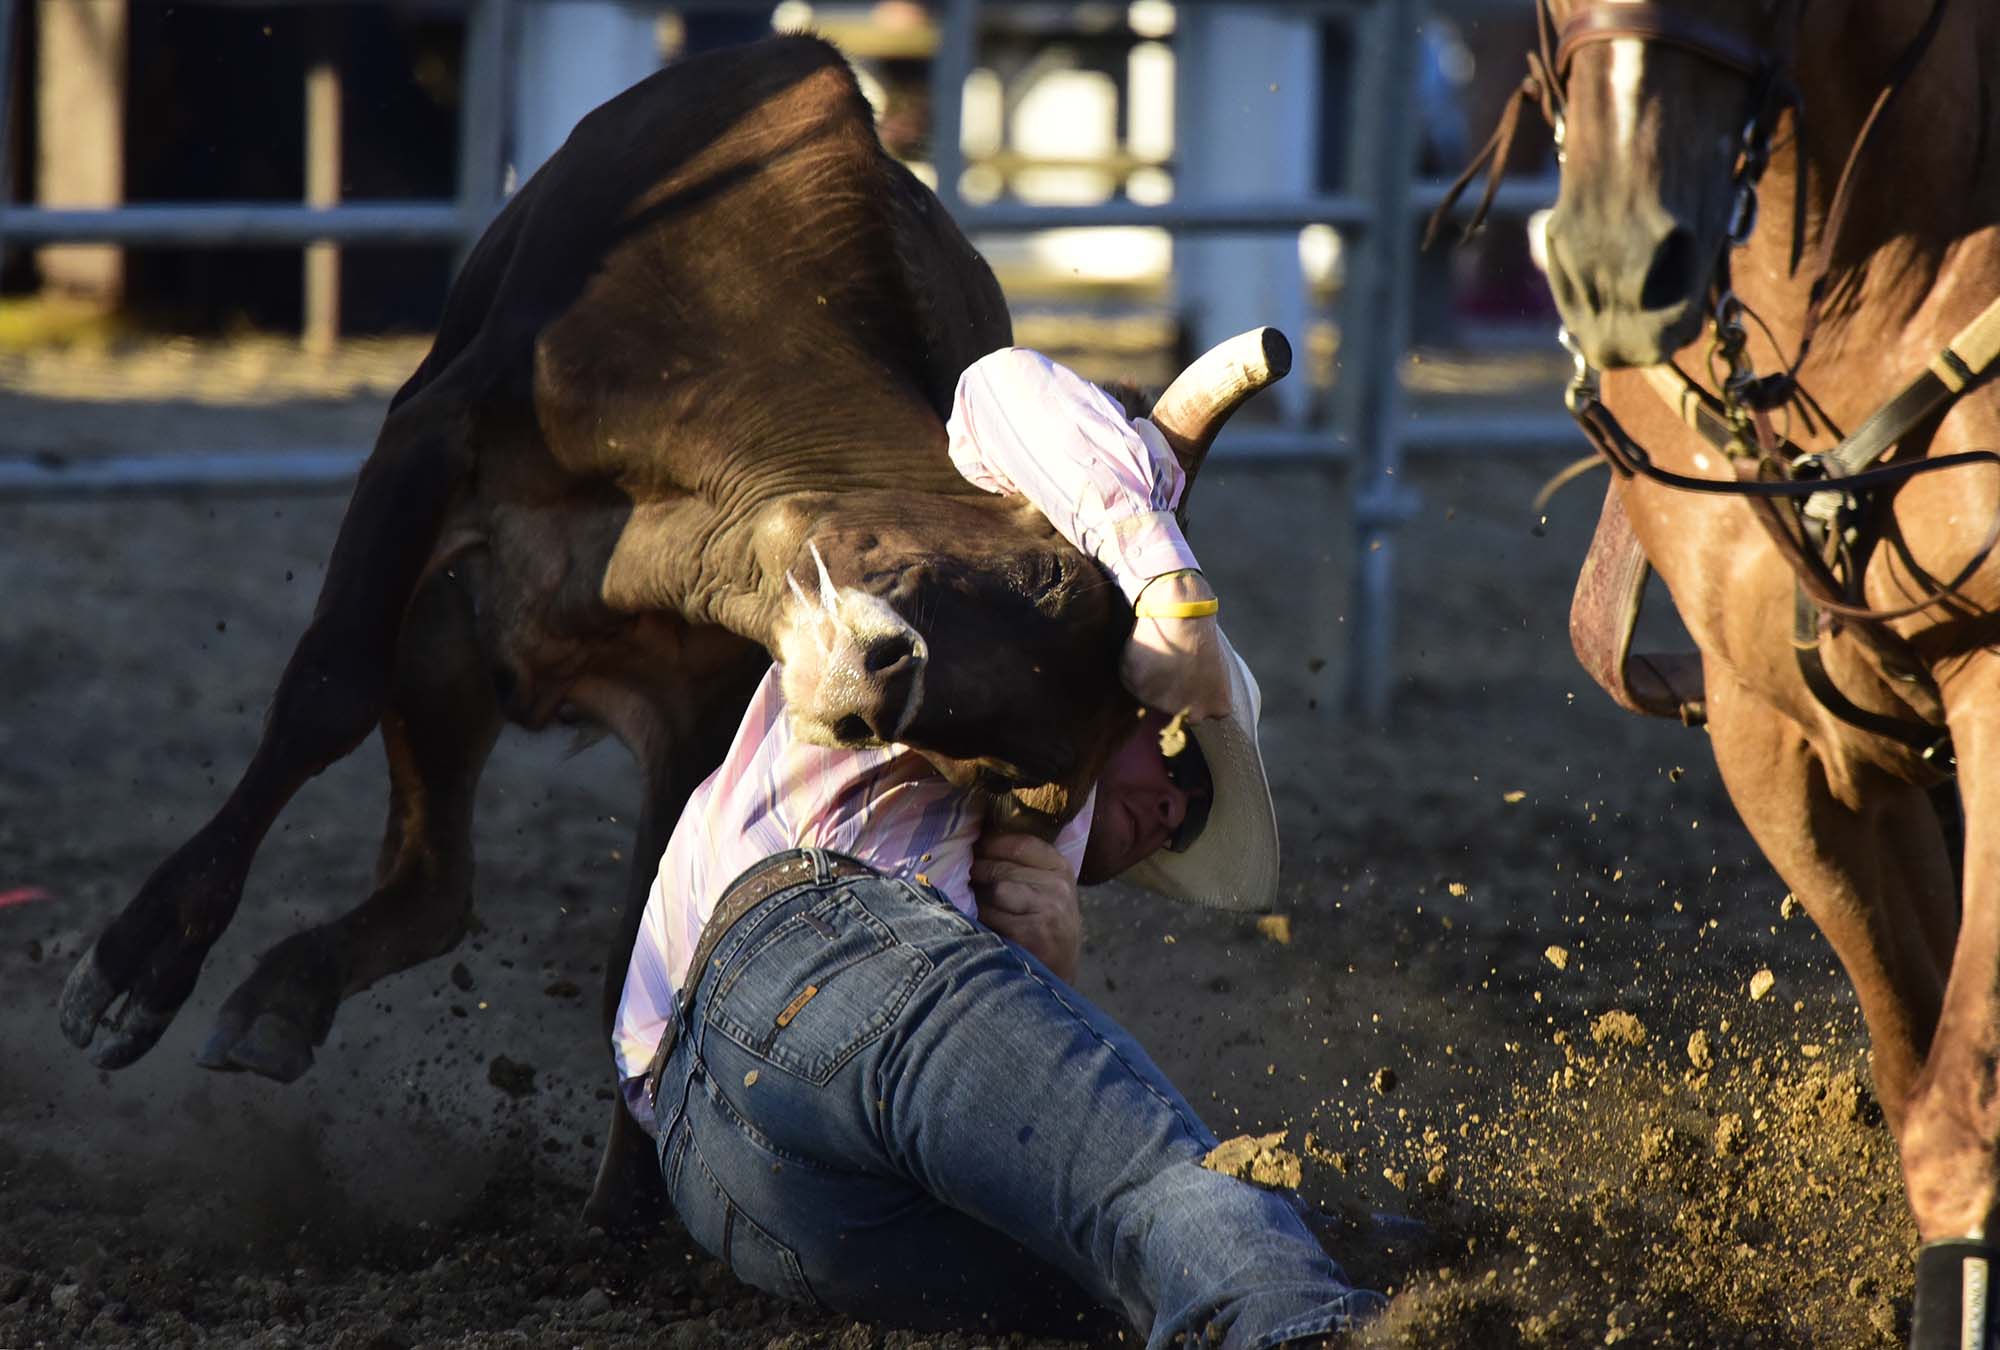 Cody Lensman of New Springfield competes in steer wrestling during the Broken Horn Rodeo at the Ottawa County Fair.